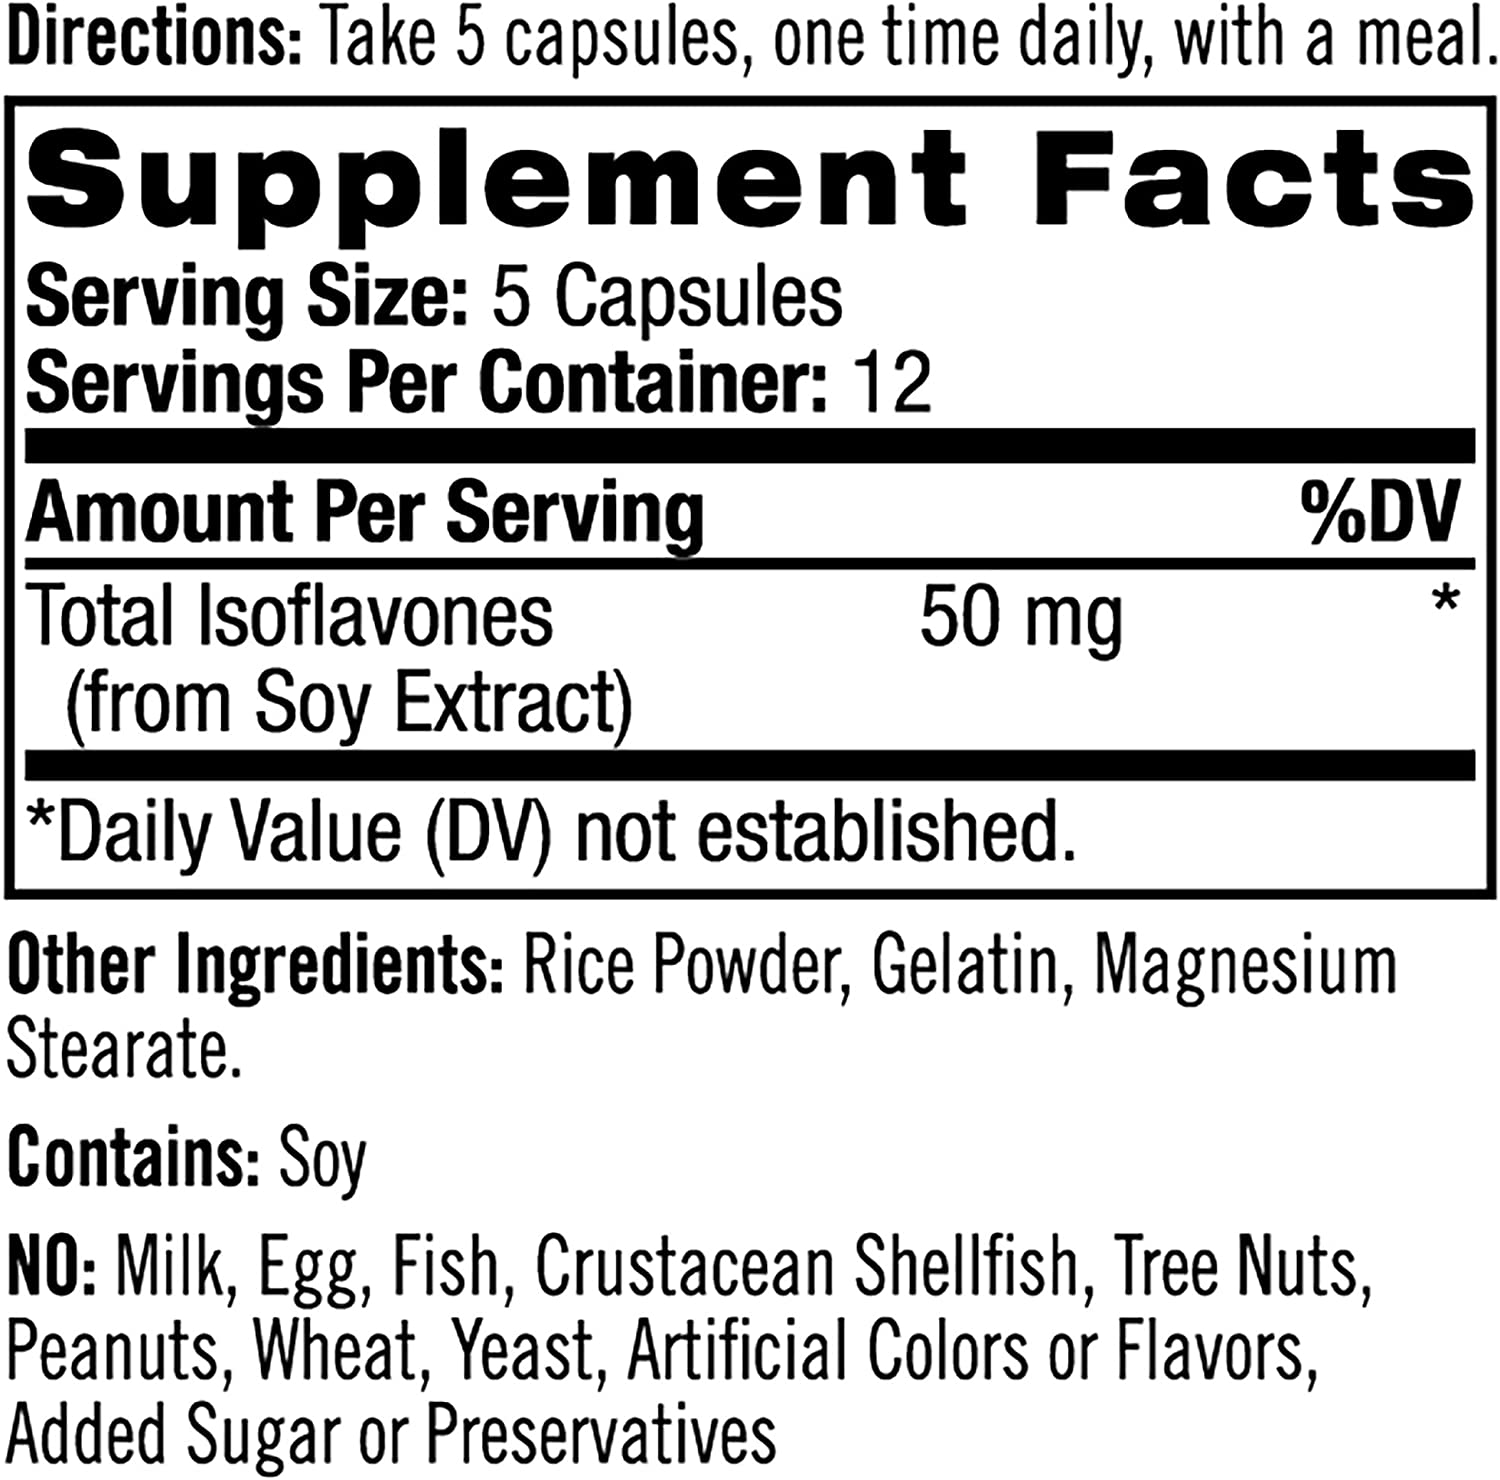 I-Soy Extract Capsules